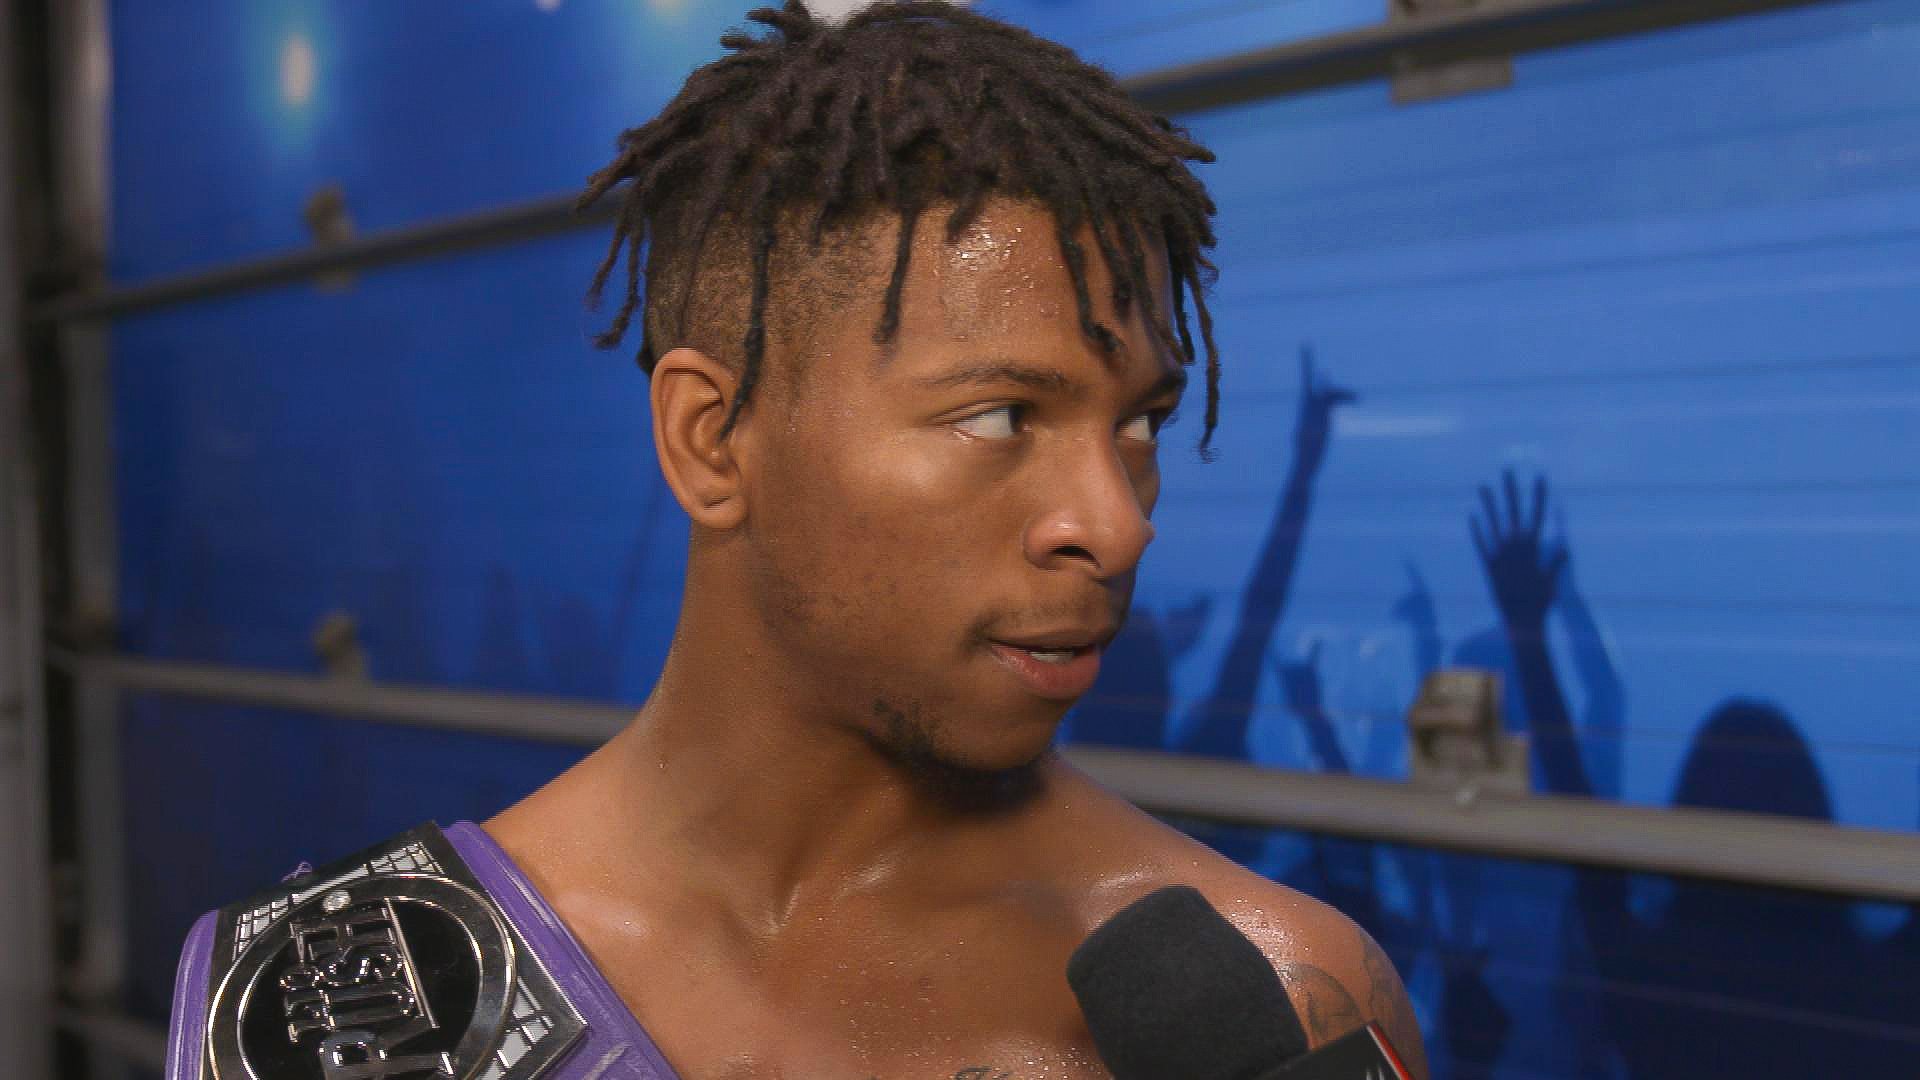 Lio Rush Calls Out Mark Henry Over Previous Comments, Henry Threatens To Take Legal Action